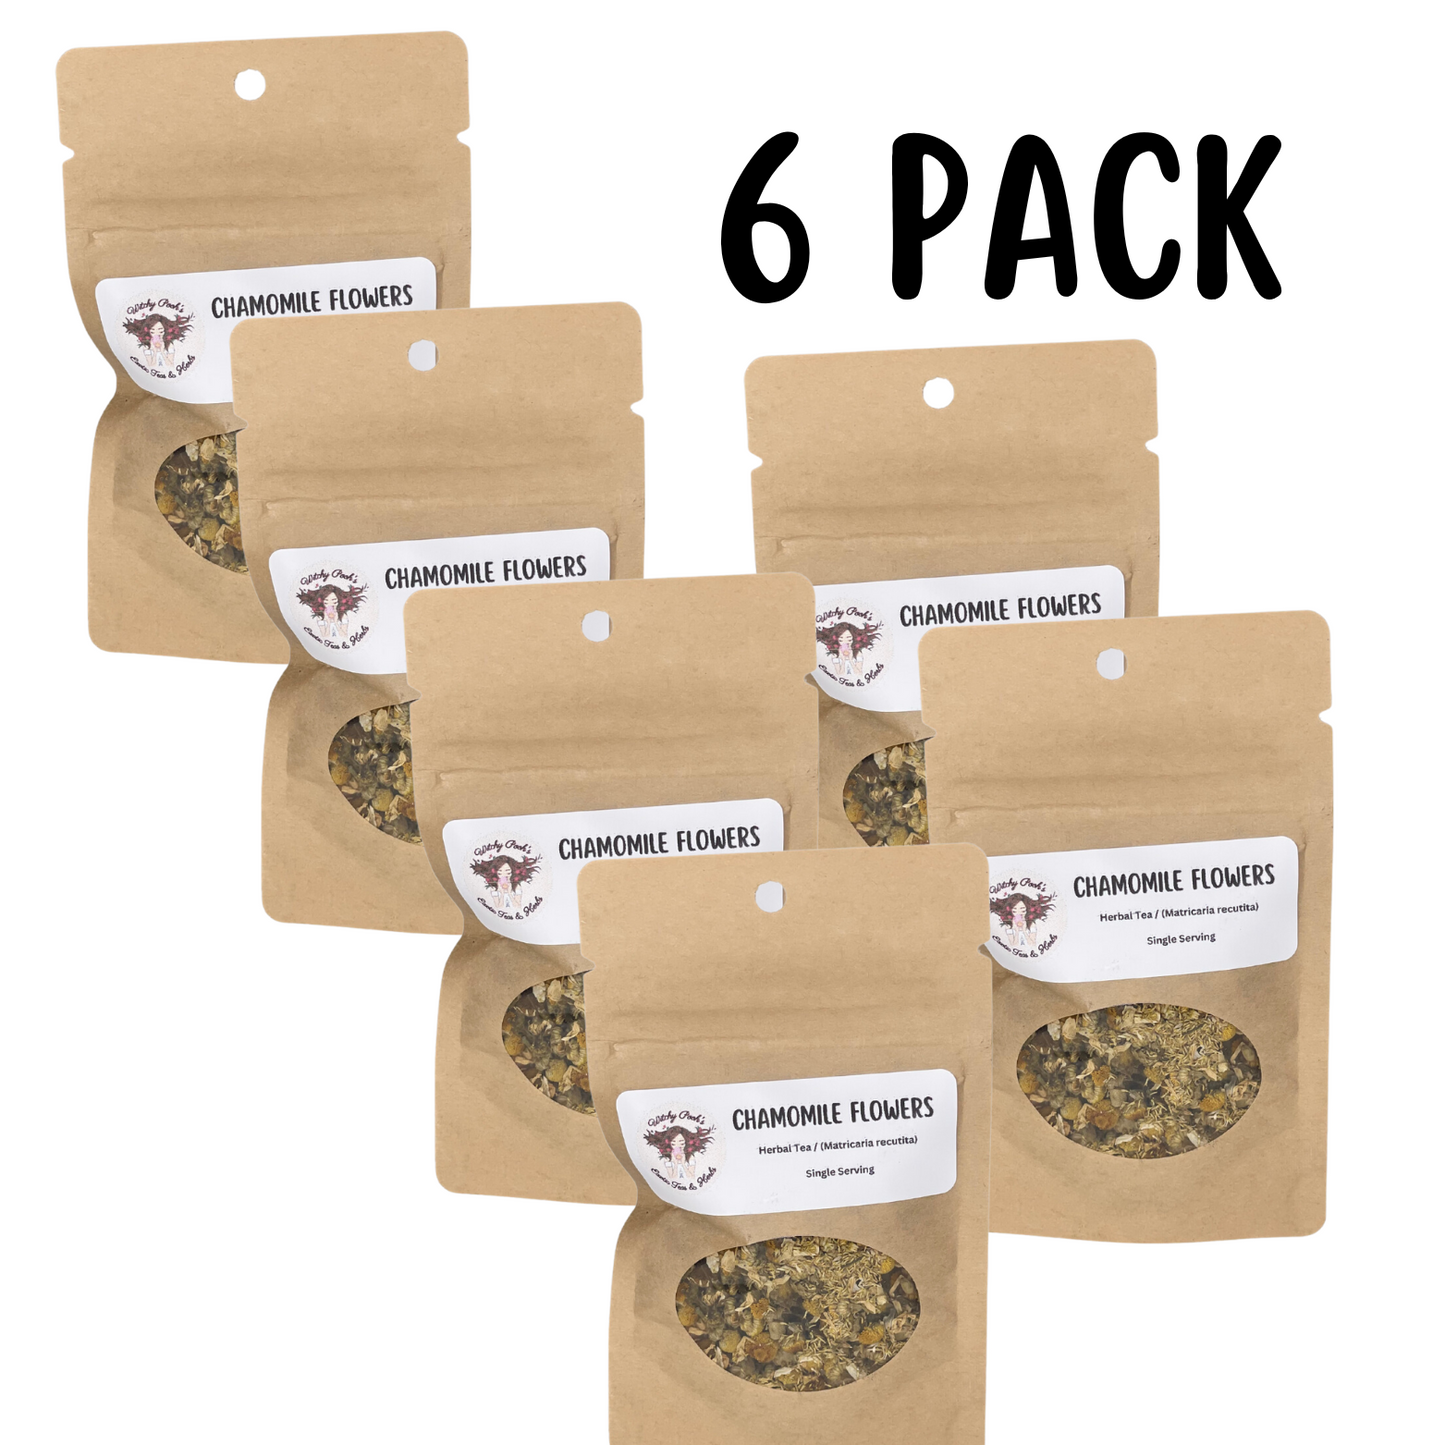 Witchy Pooh's Chamomile Flowers Loose Leaf Herbal Tea, Caffeine Free, For Stress Relief and Sleep Aid-8